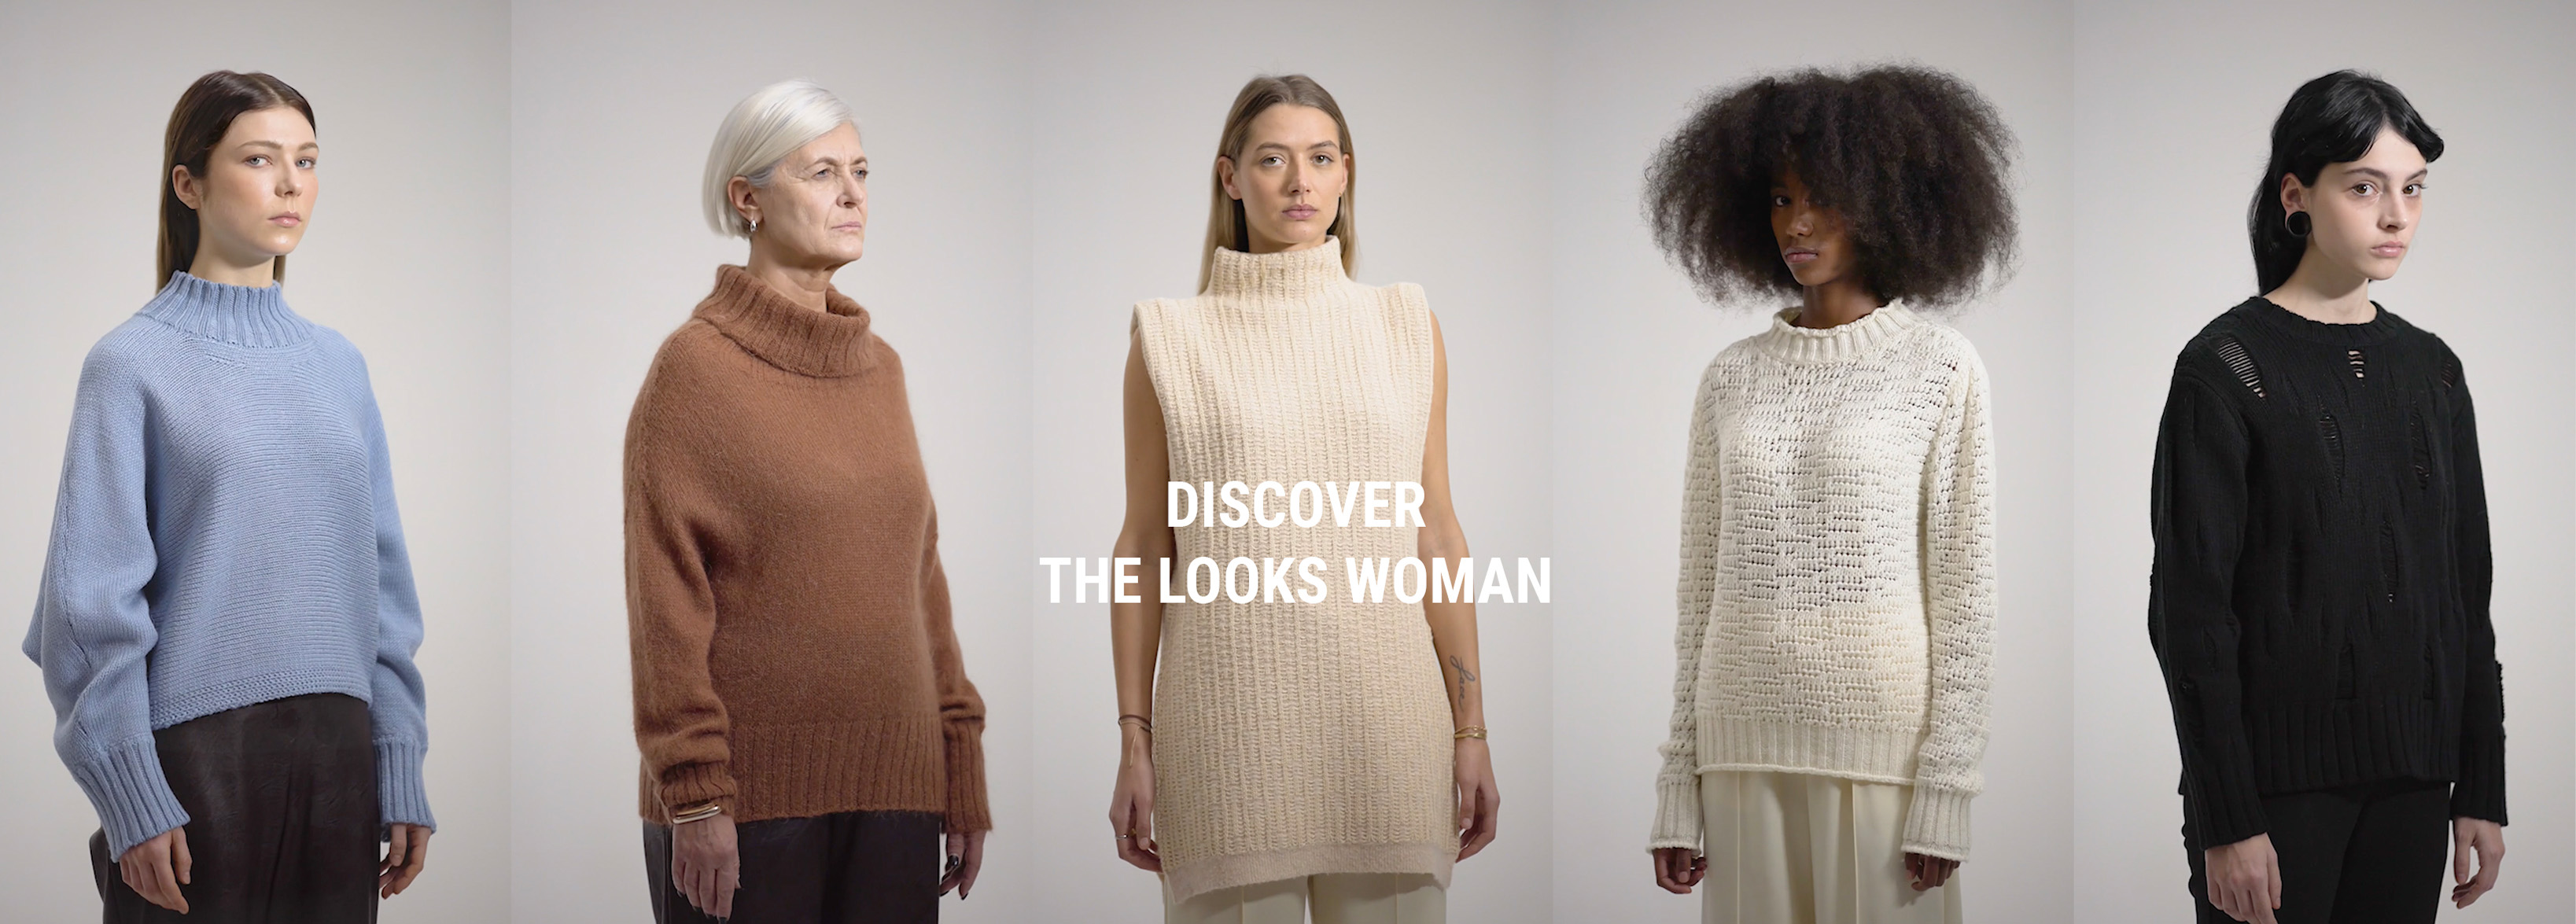 Discover the looks woman